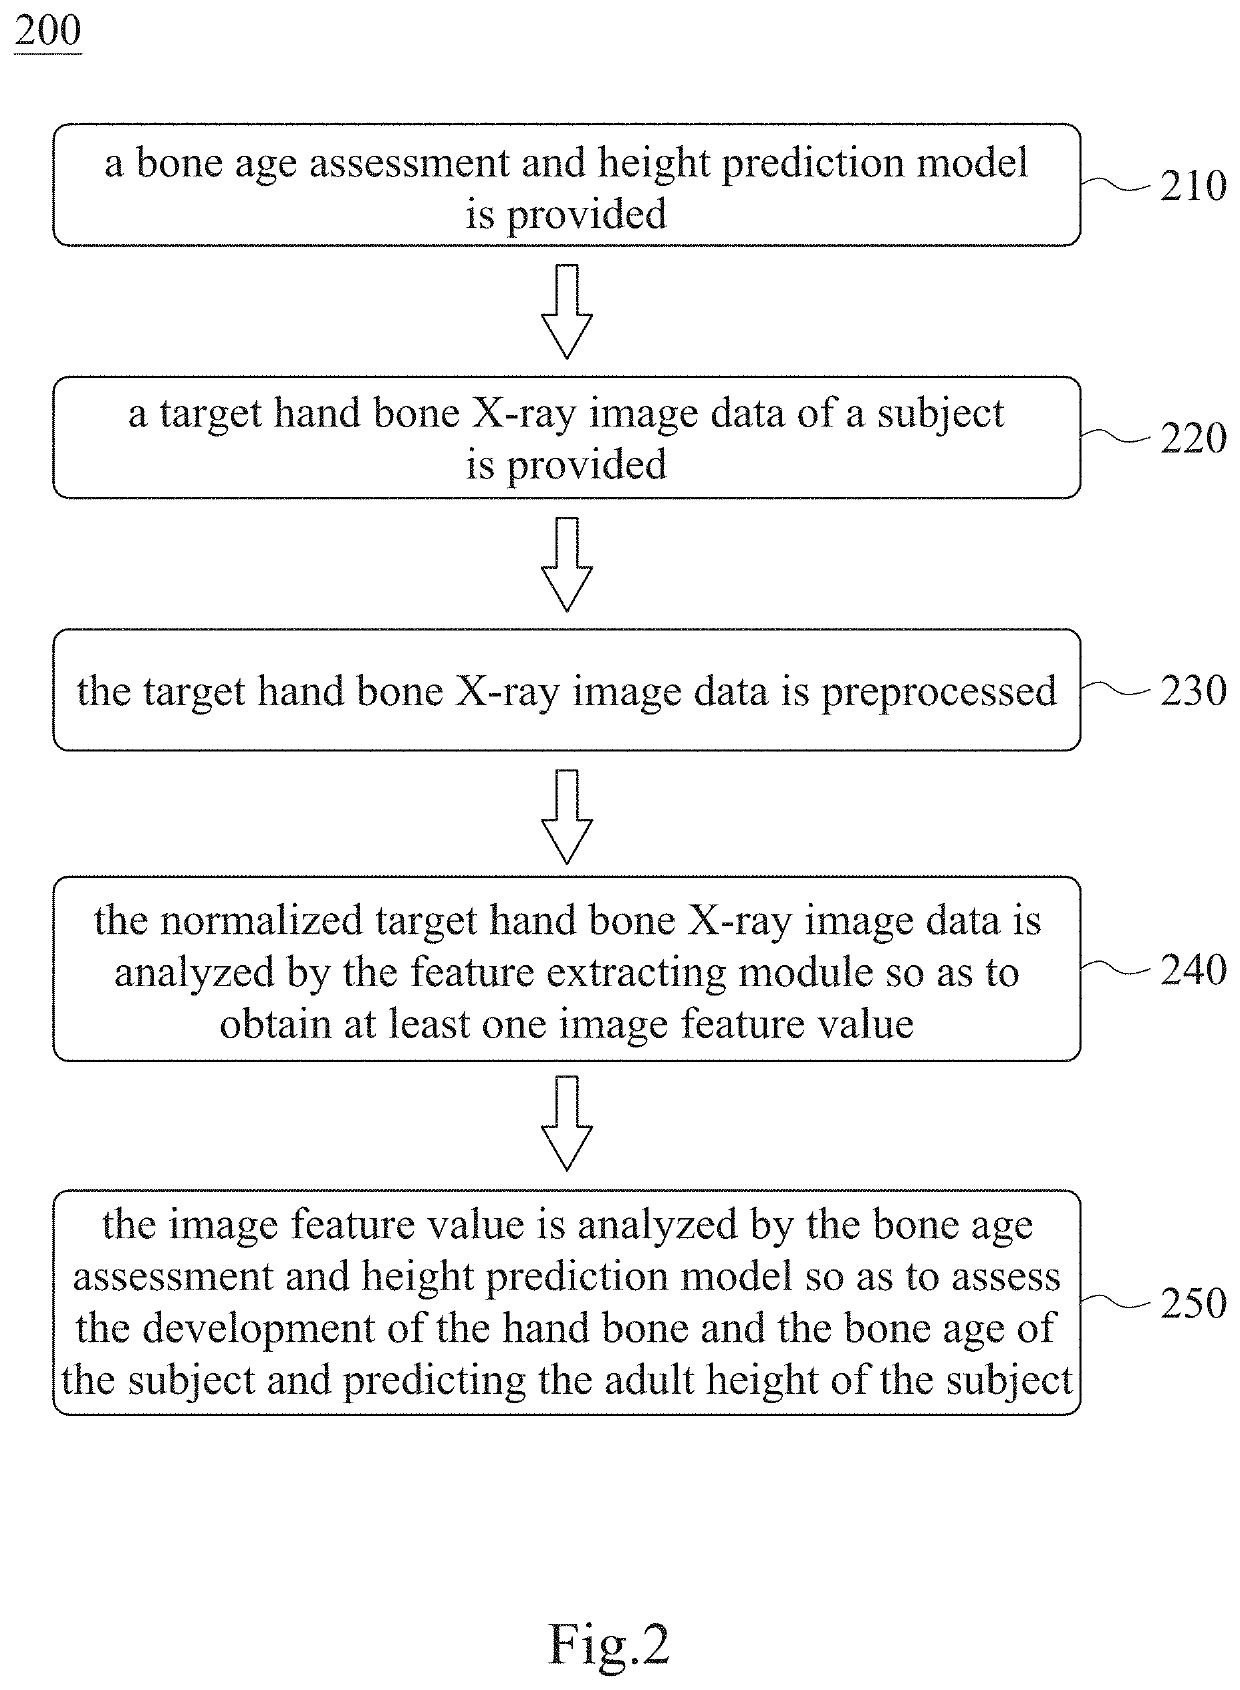 Bone Age Assessment And Height Prediction Model, System Thereof And Prediction Method Thereof